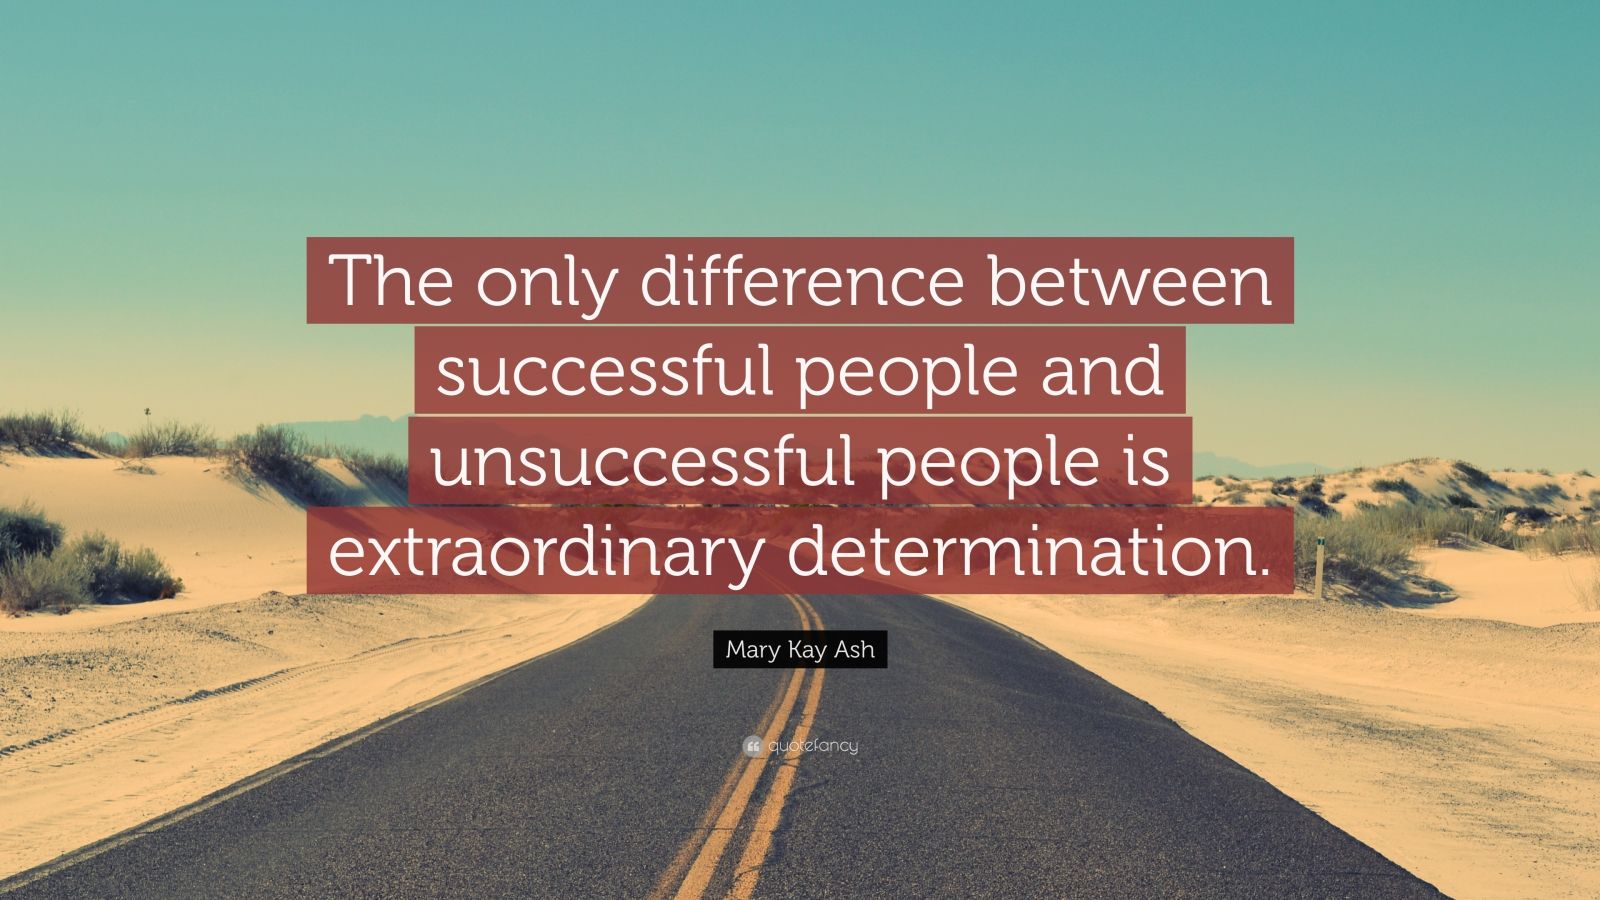 Mary Kay Ash Quote: “The only difference between successful people and ...